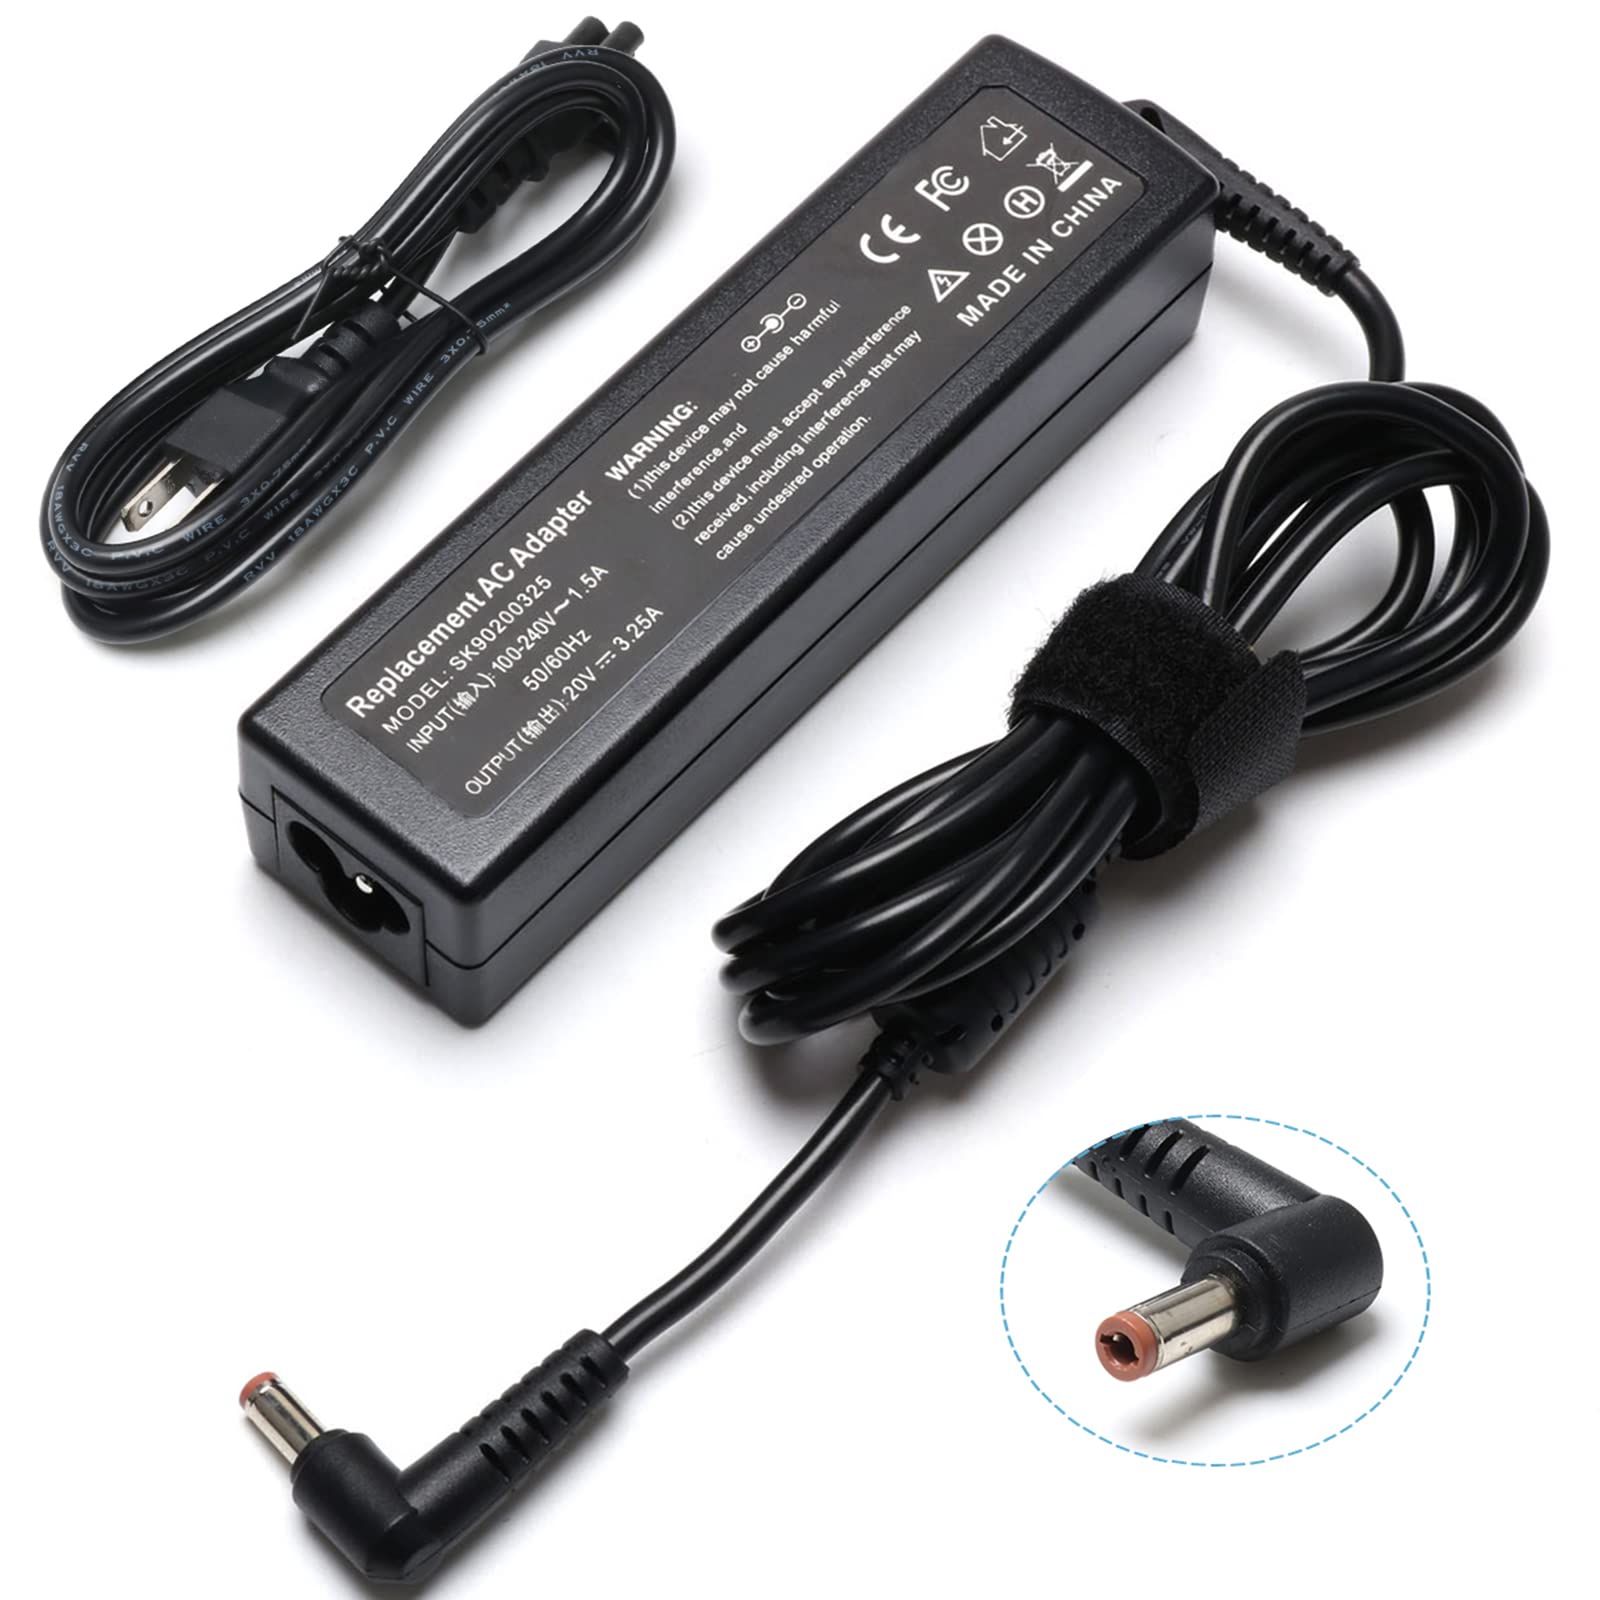 Mua New Z570 Z580 65W AC Adapter Laptop Charger for Lenovo IdeaPad Z560  Z575 Z565 U310 U400 U410 U510 V570 G580 M30-70 B560 B570-1068B3U,CPA-A065  PA-1650-56LC ADP-65KH B PA-1650-37LC Power Supply Cord trên